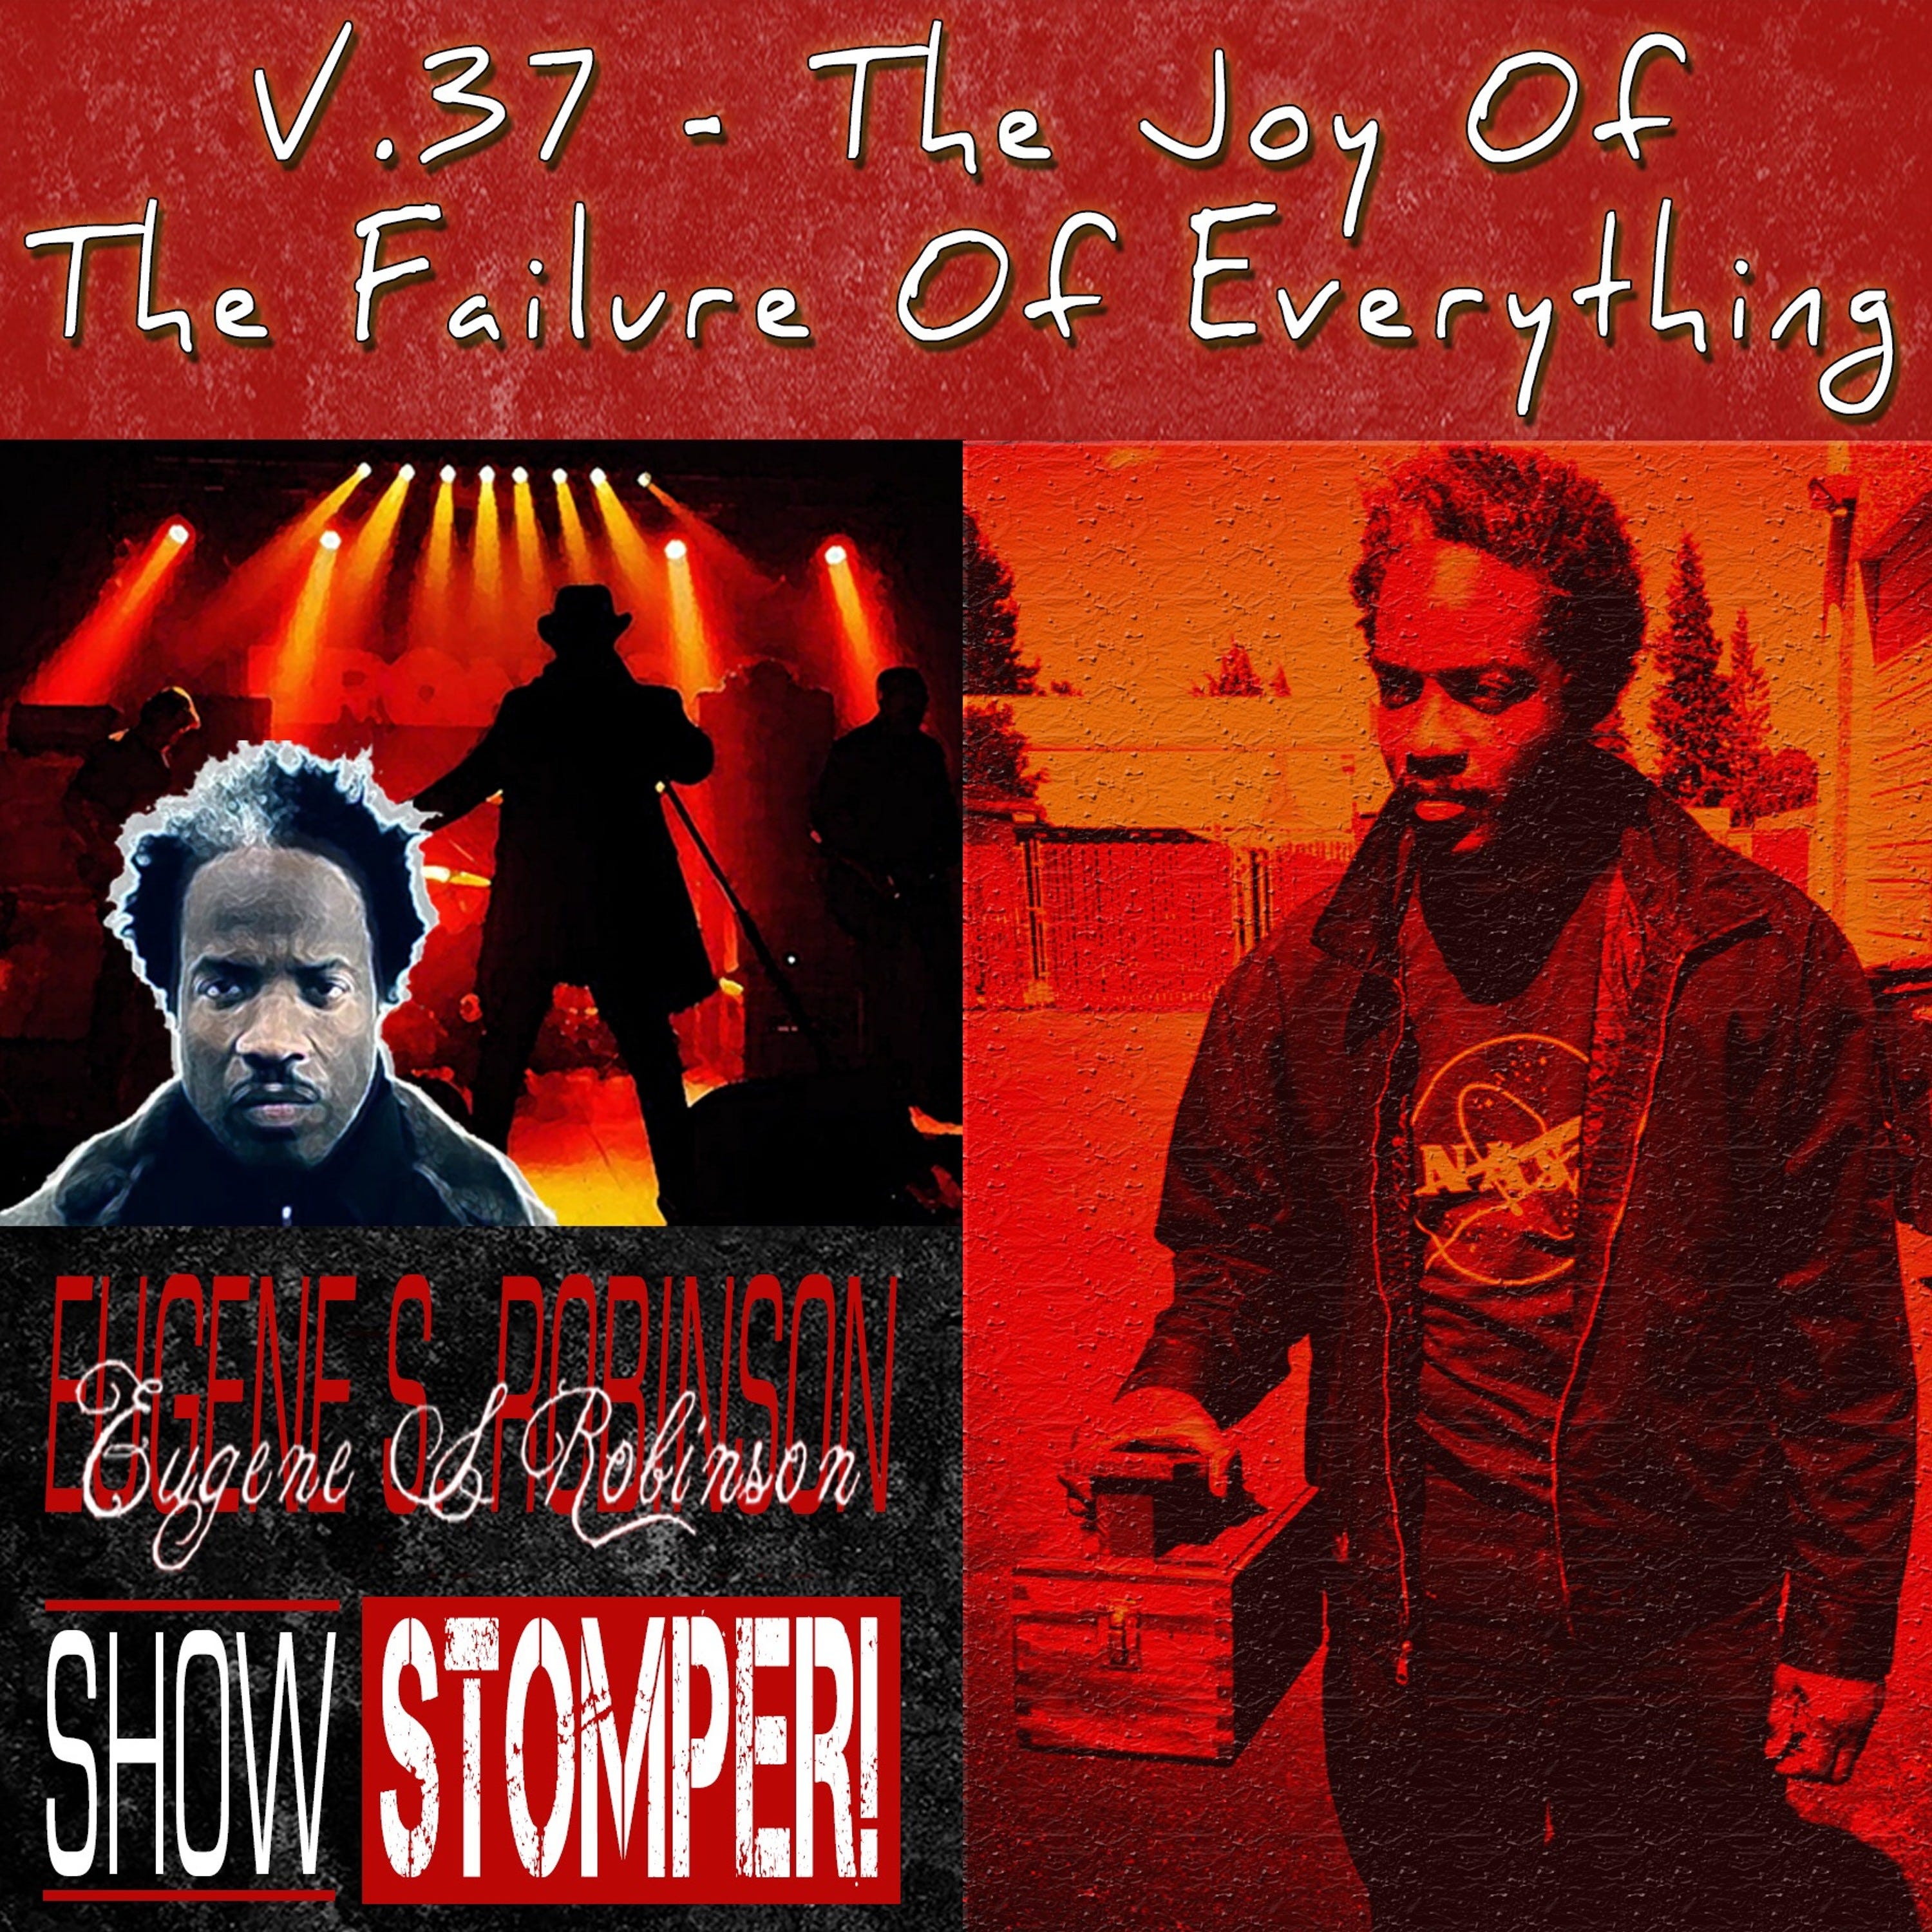 The Eugene S. Robinson Show Stomper! V.37 - The Joy Of The Failure Of Everything